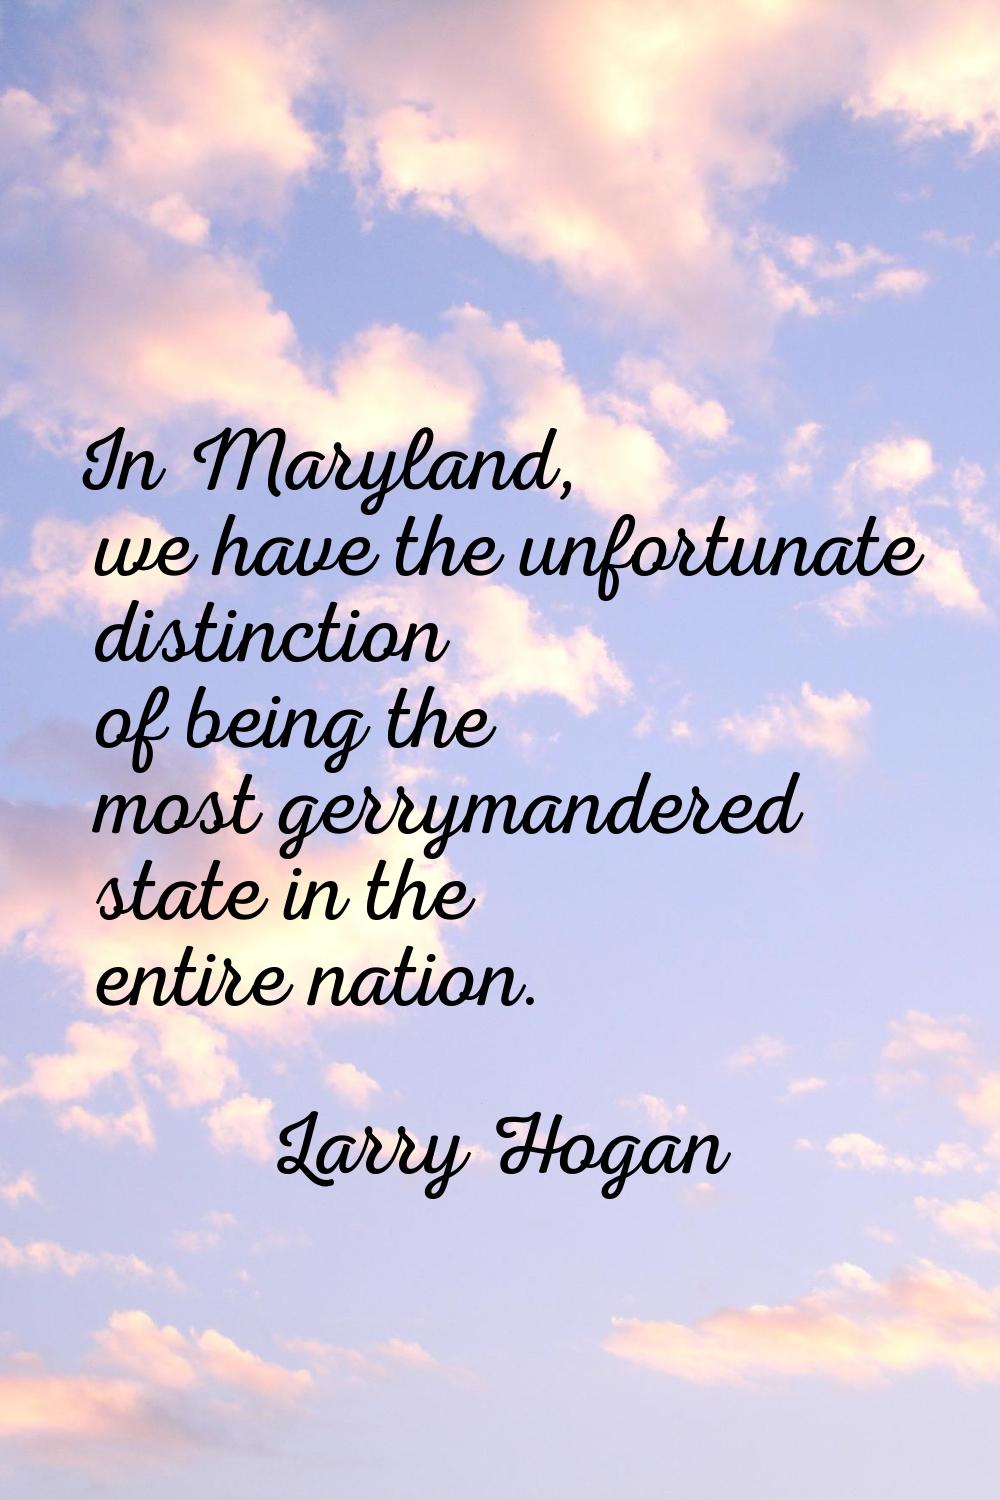 In Maryland, we have the unfortunate distinction of being the most gerrymandered state in the entir